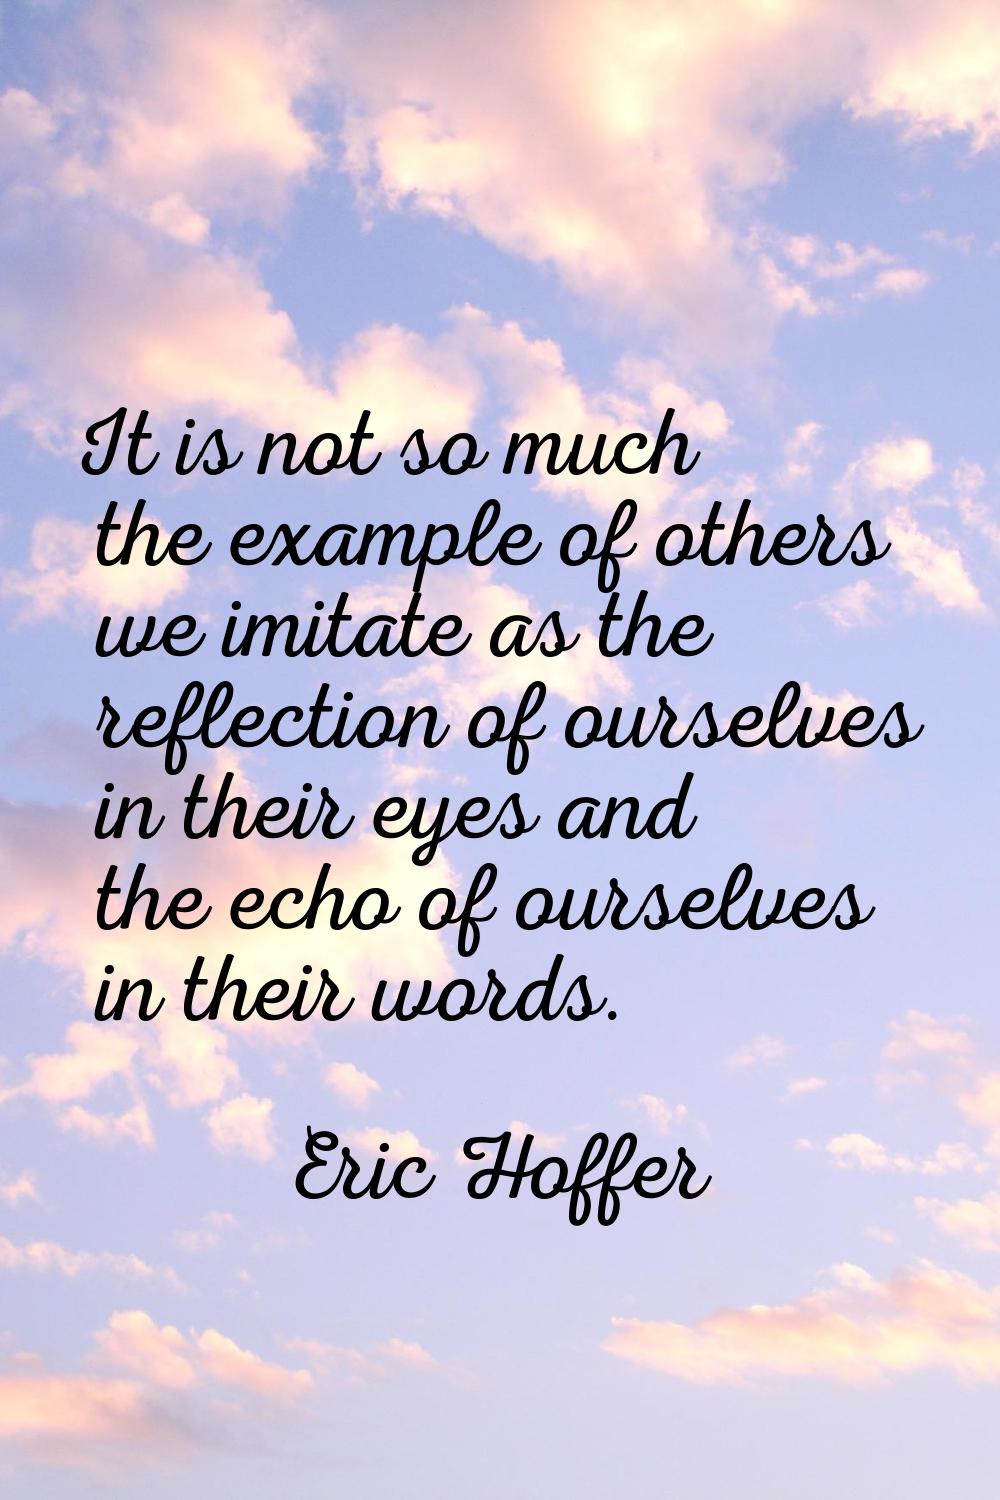 It is not so much the example of others we imitate as the reflection of ourselves in their eyes and